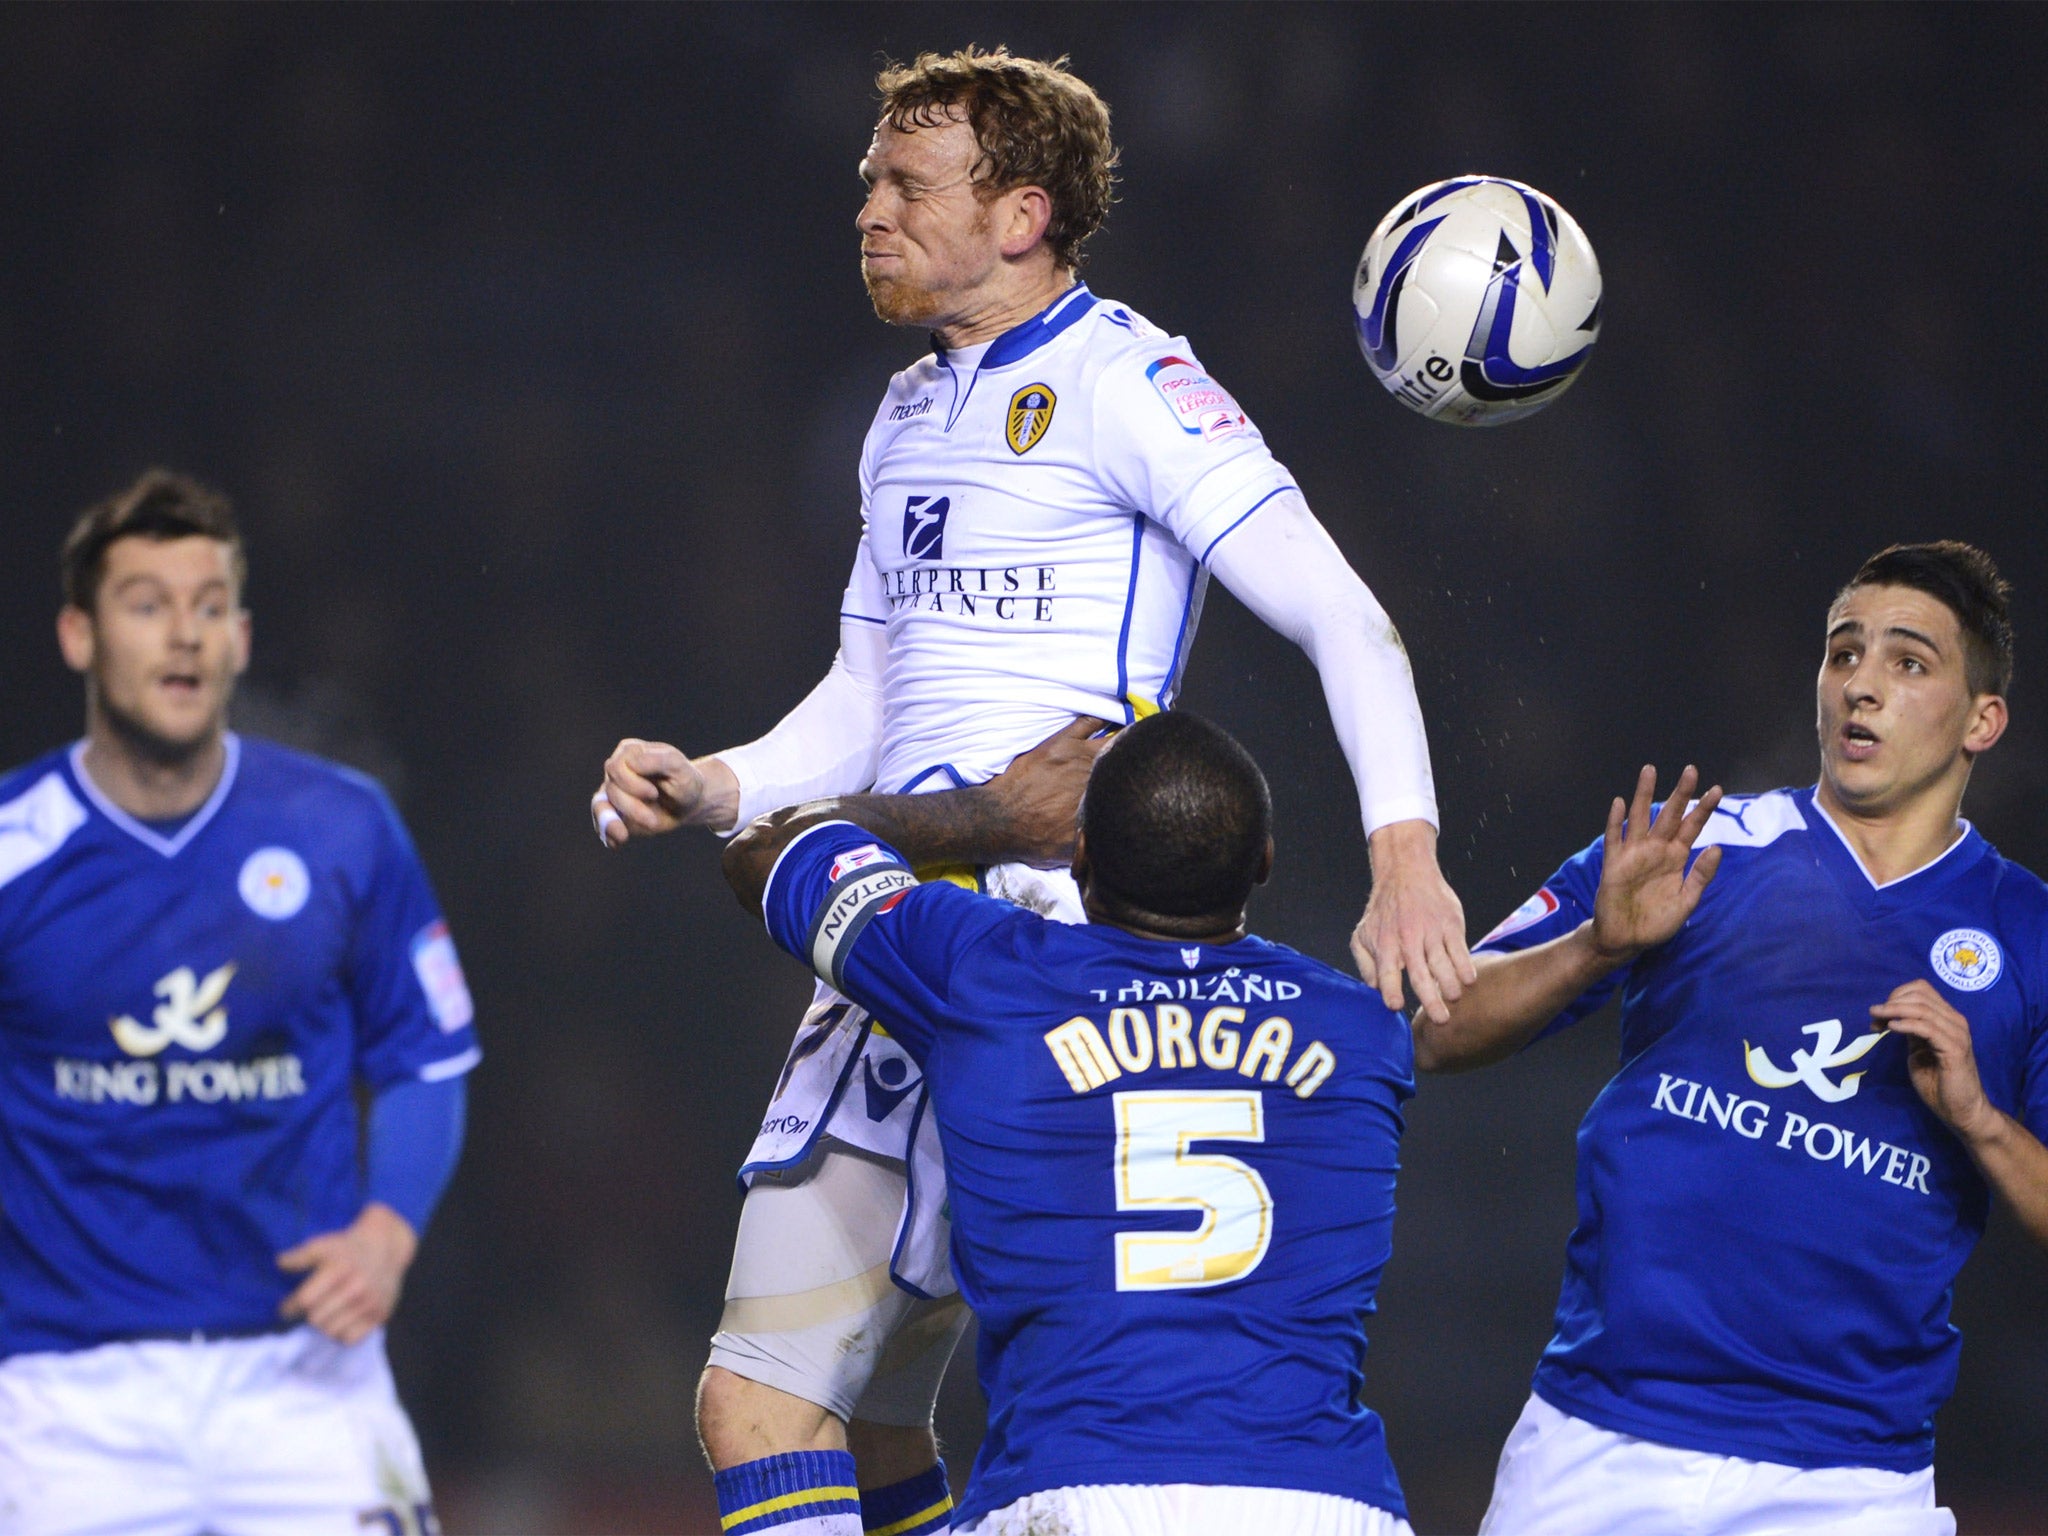 Leeds United’s Paul Green challenges for the ball during last night’s Championship match